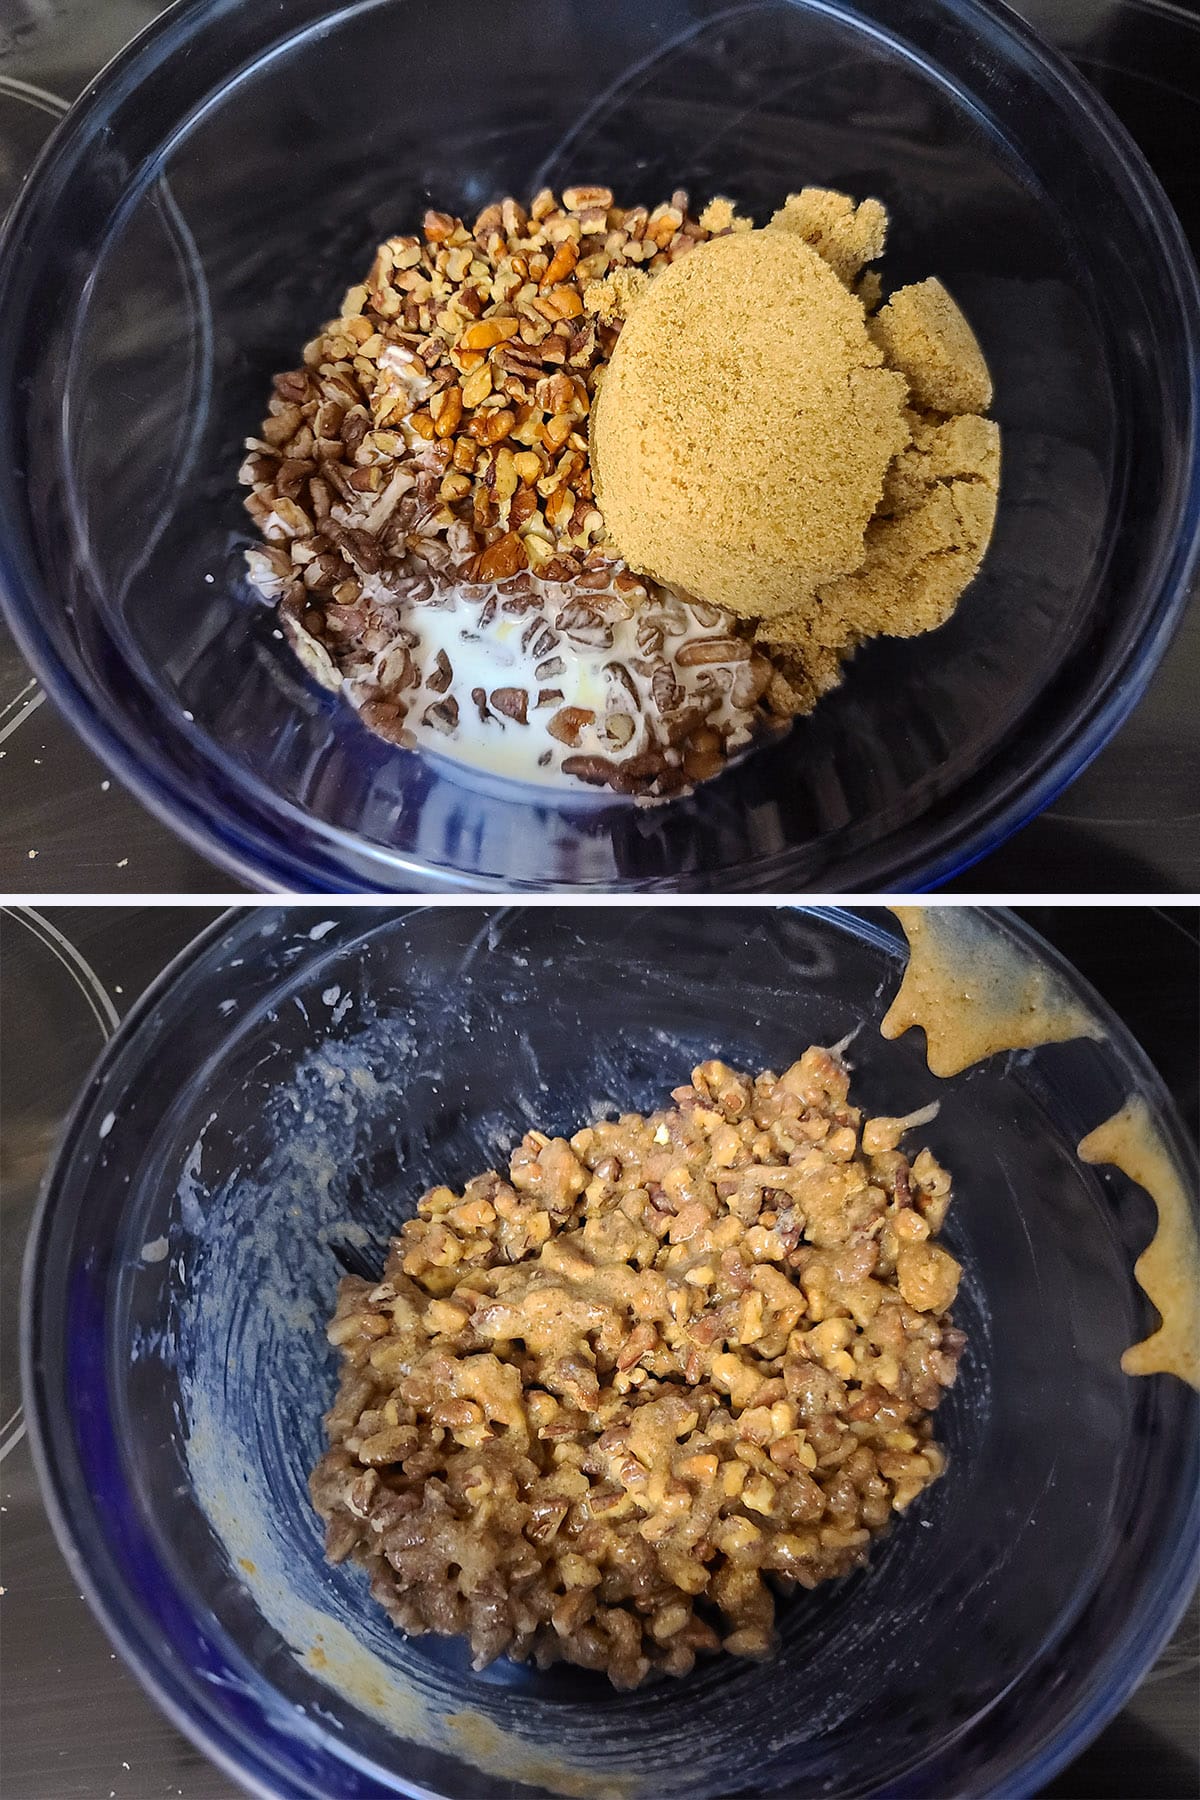 A 2 part image showing the pecan pie filling being mixed together.